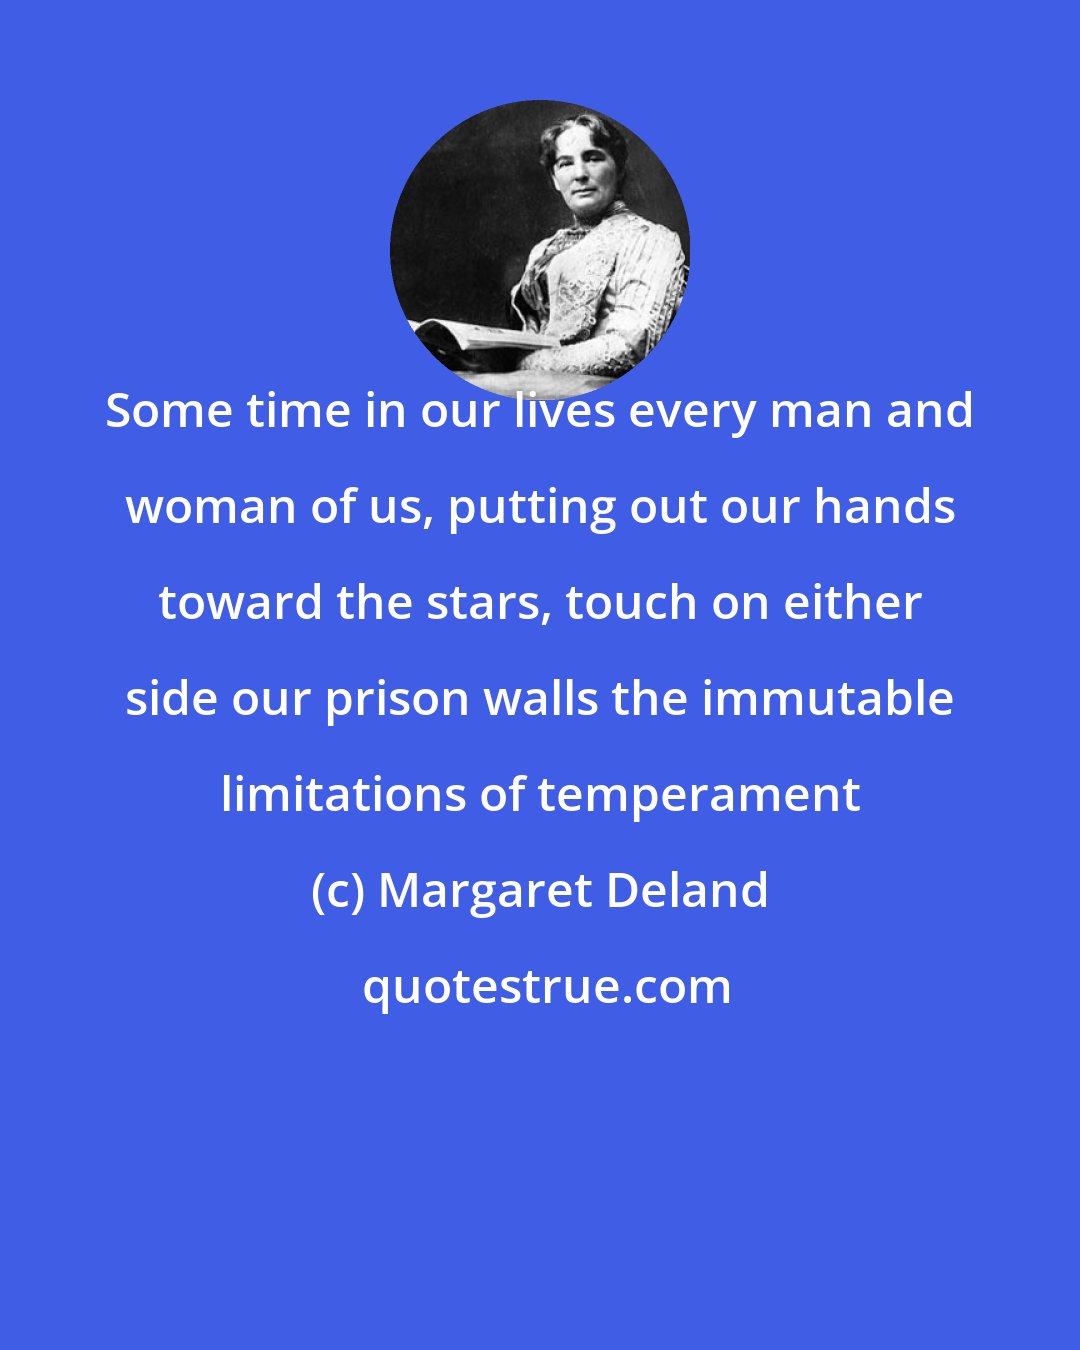 Margaret Deland: Some time in our lives every man and woman of us, putting out our hands toward the stars, touch on either side our prison walls the immutable limitations of temperament